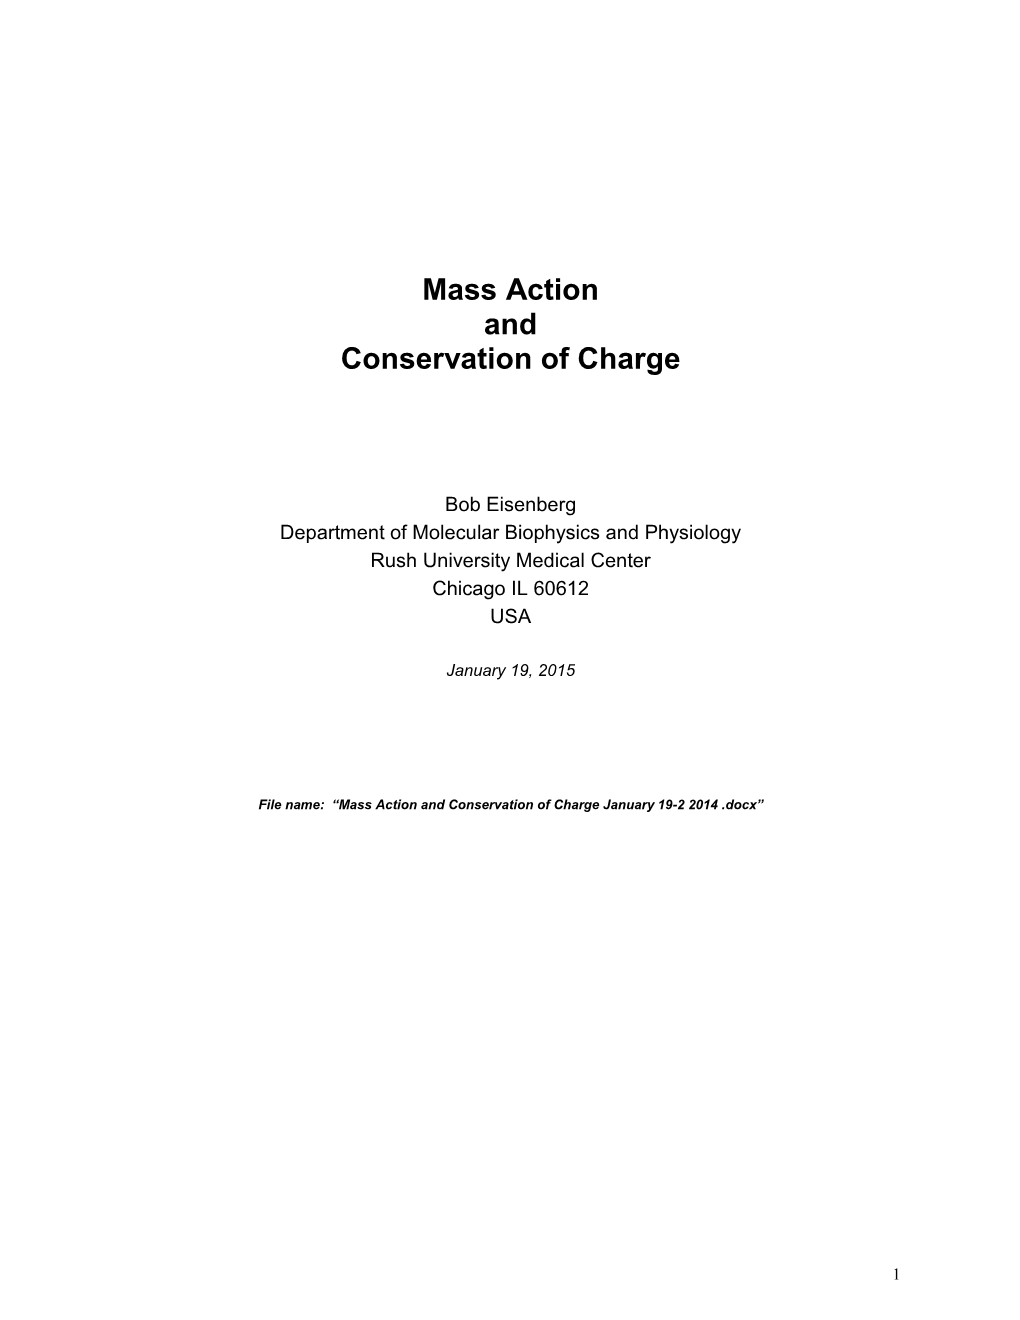 Mass Action and Conservation of Charge